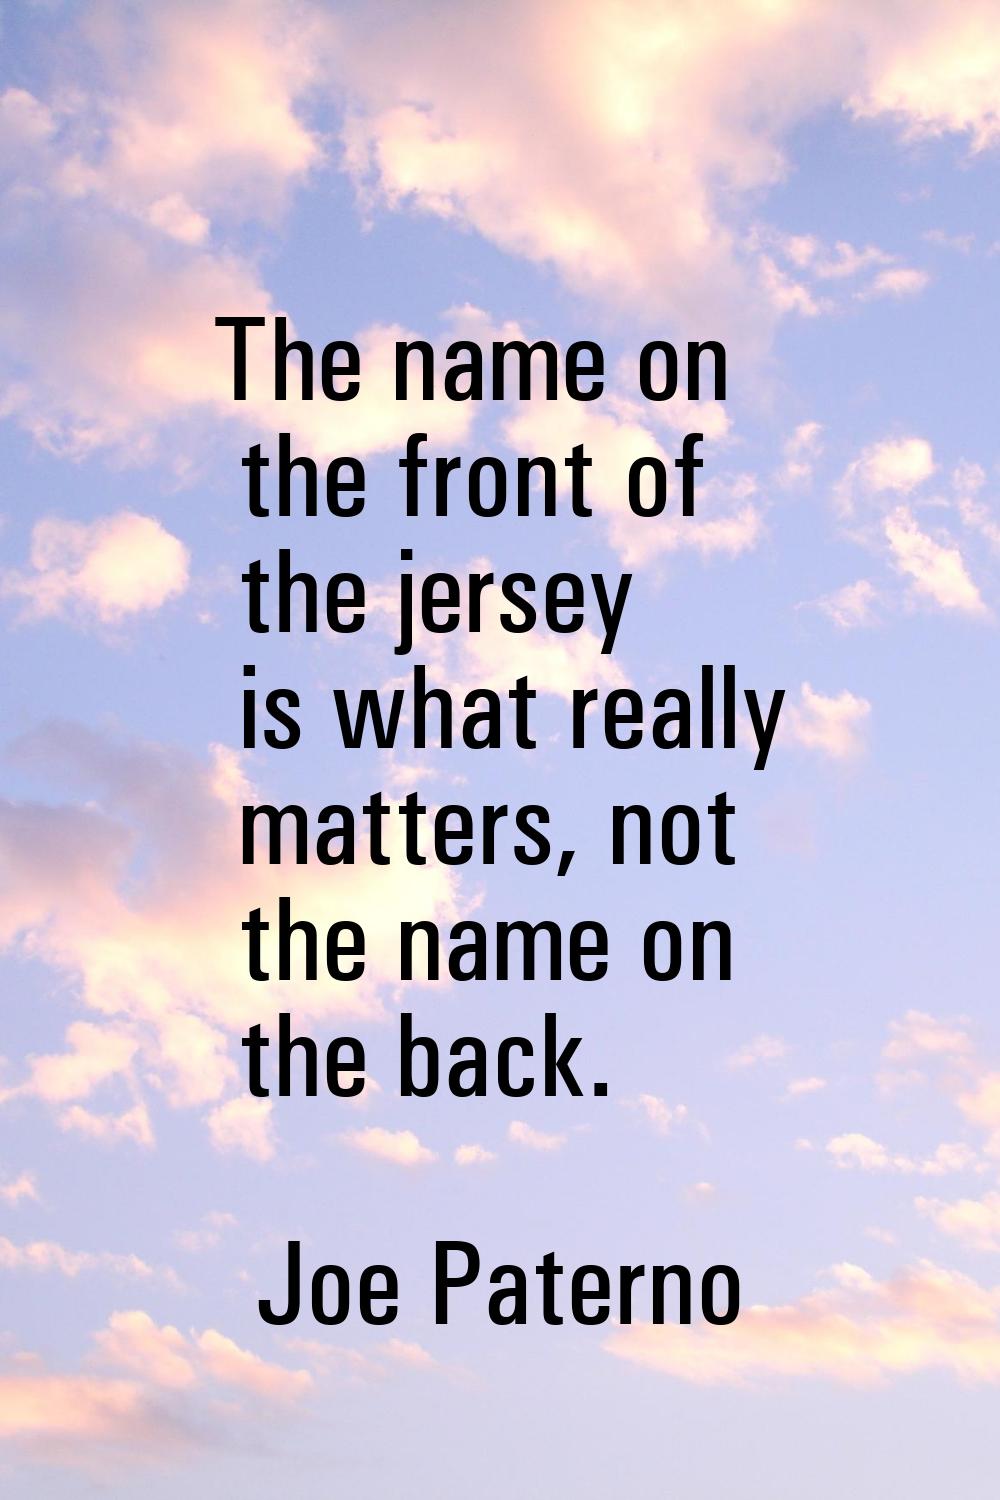 The name on the front of the jersey is what really matters, not the name on the back.